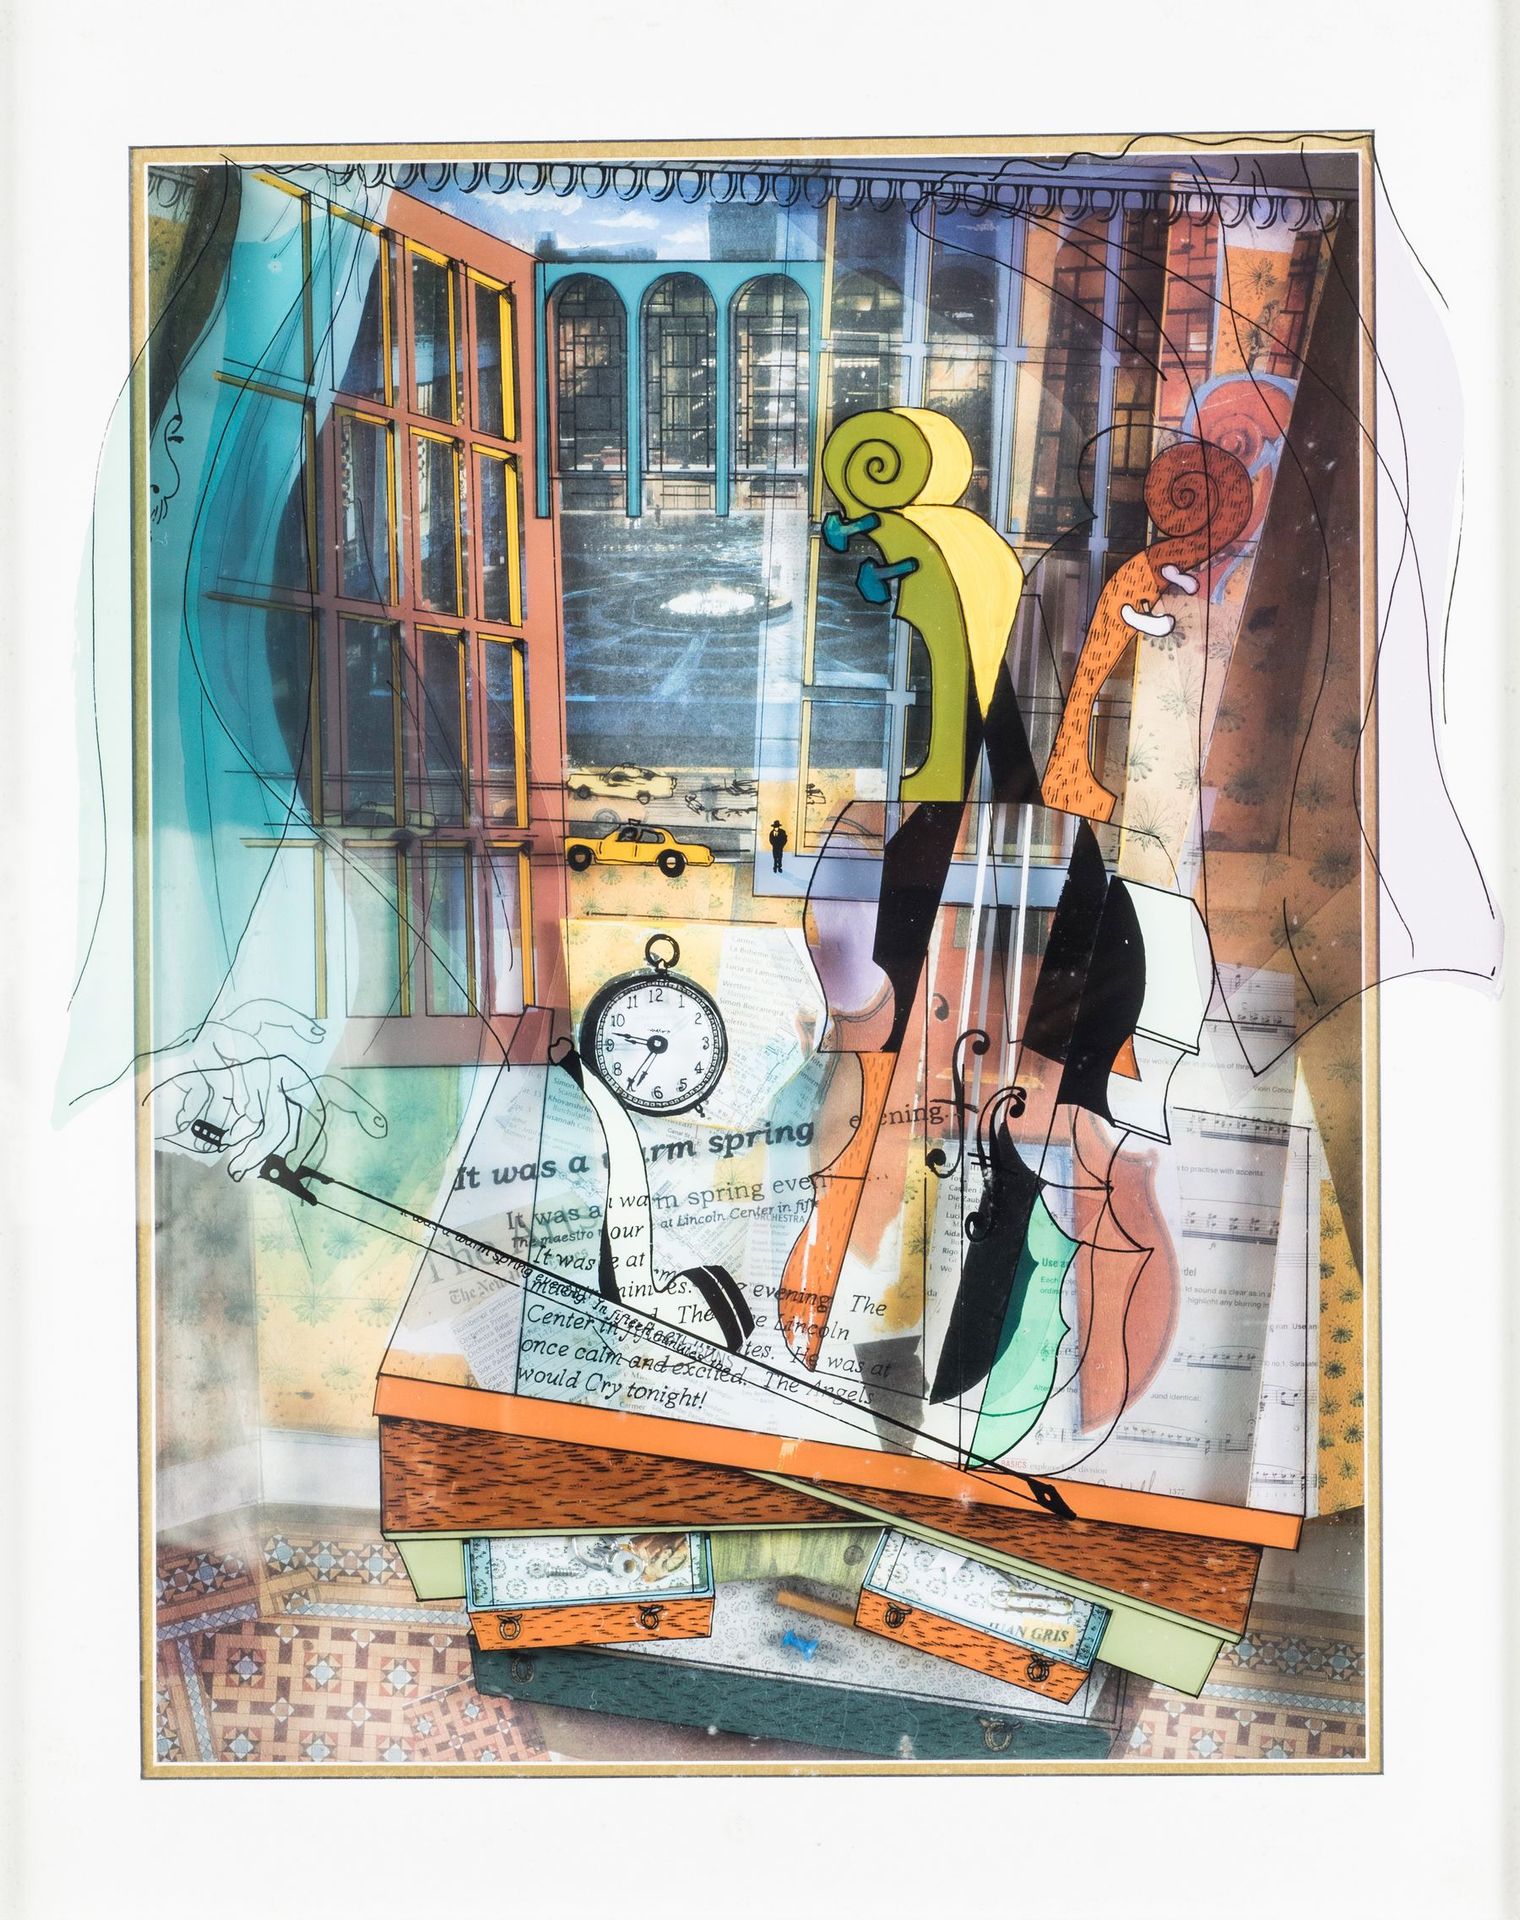 Null Jean-Pierre WEILL 

Tribute. 

Mixed media on different layers of glass.